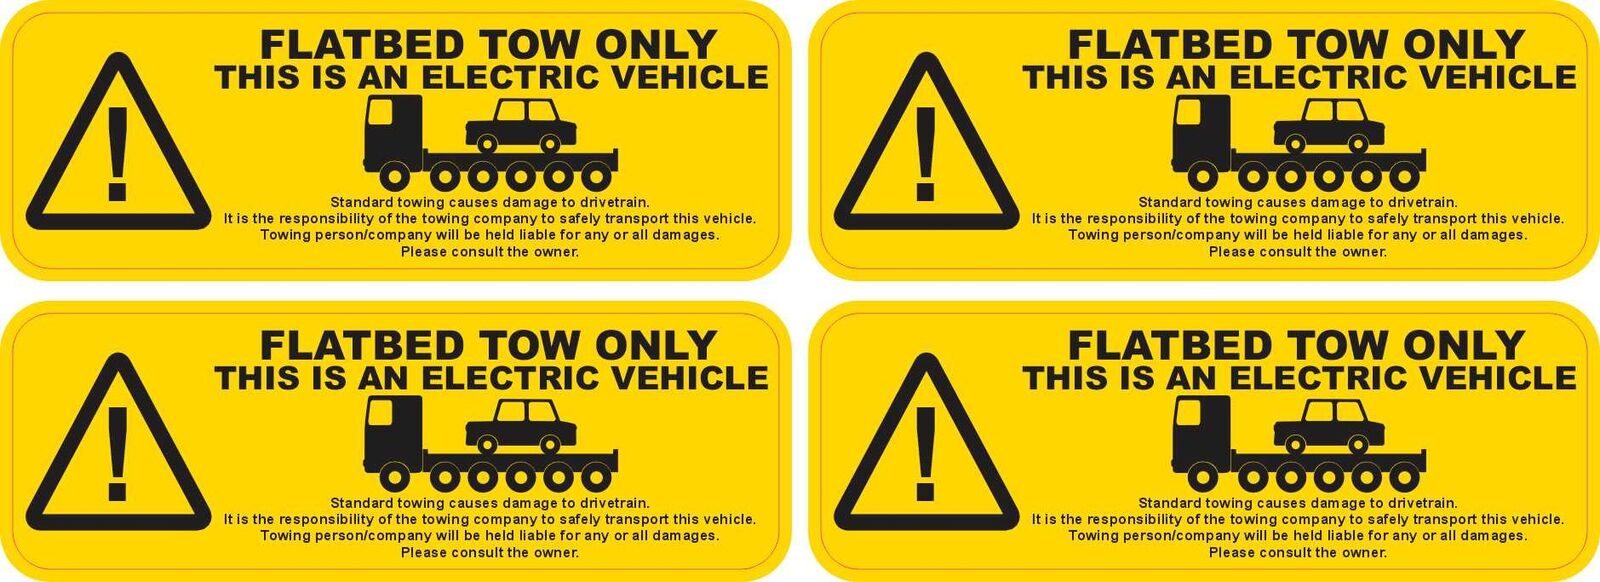 StickerTalk Electric Vehicle Flatbed Tow Sticker, 1 inches x 3 inches